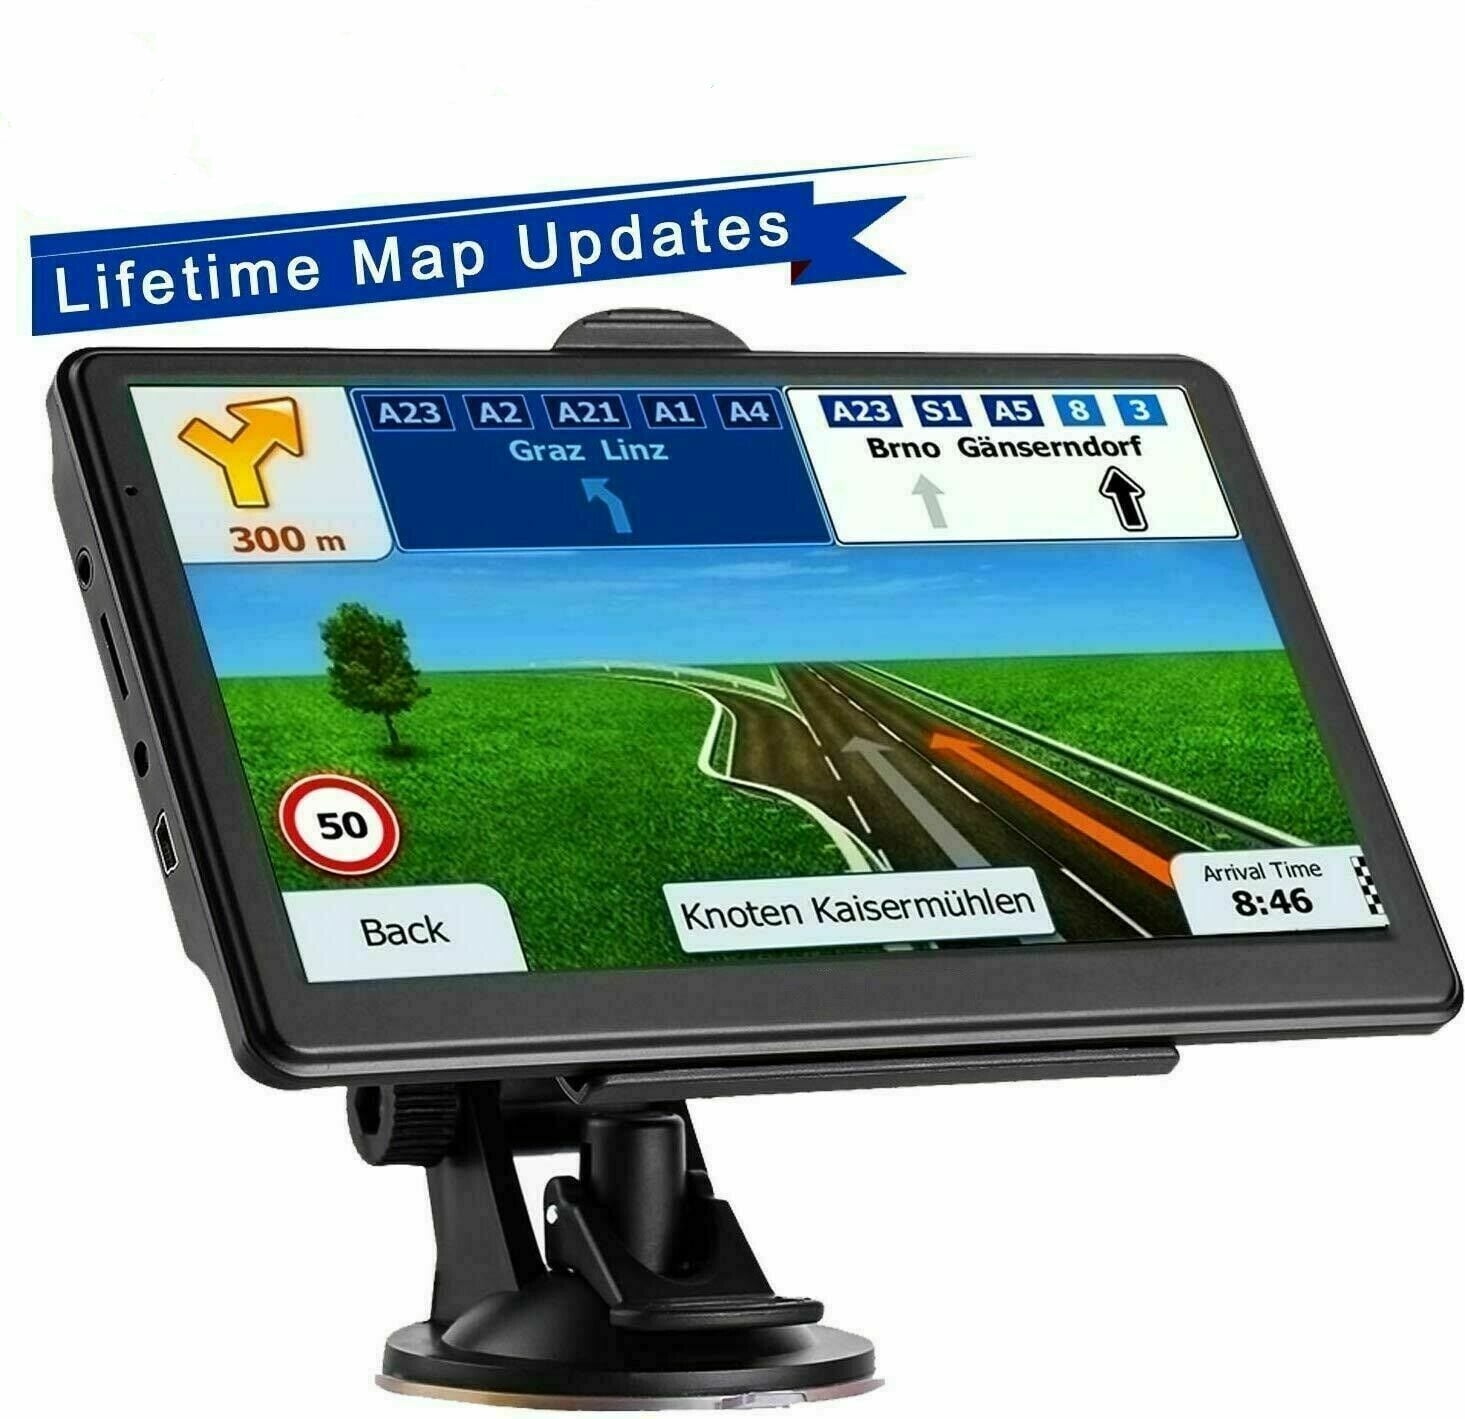 7 Inch Touch Screen GPS Navigation Maps System Device International GPS Navigator 256M 8GB FM with Bluetooth Lifetime Map Update for Cars Trucks Vehicles North America 